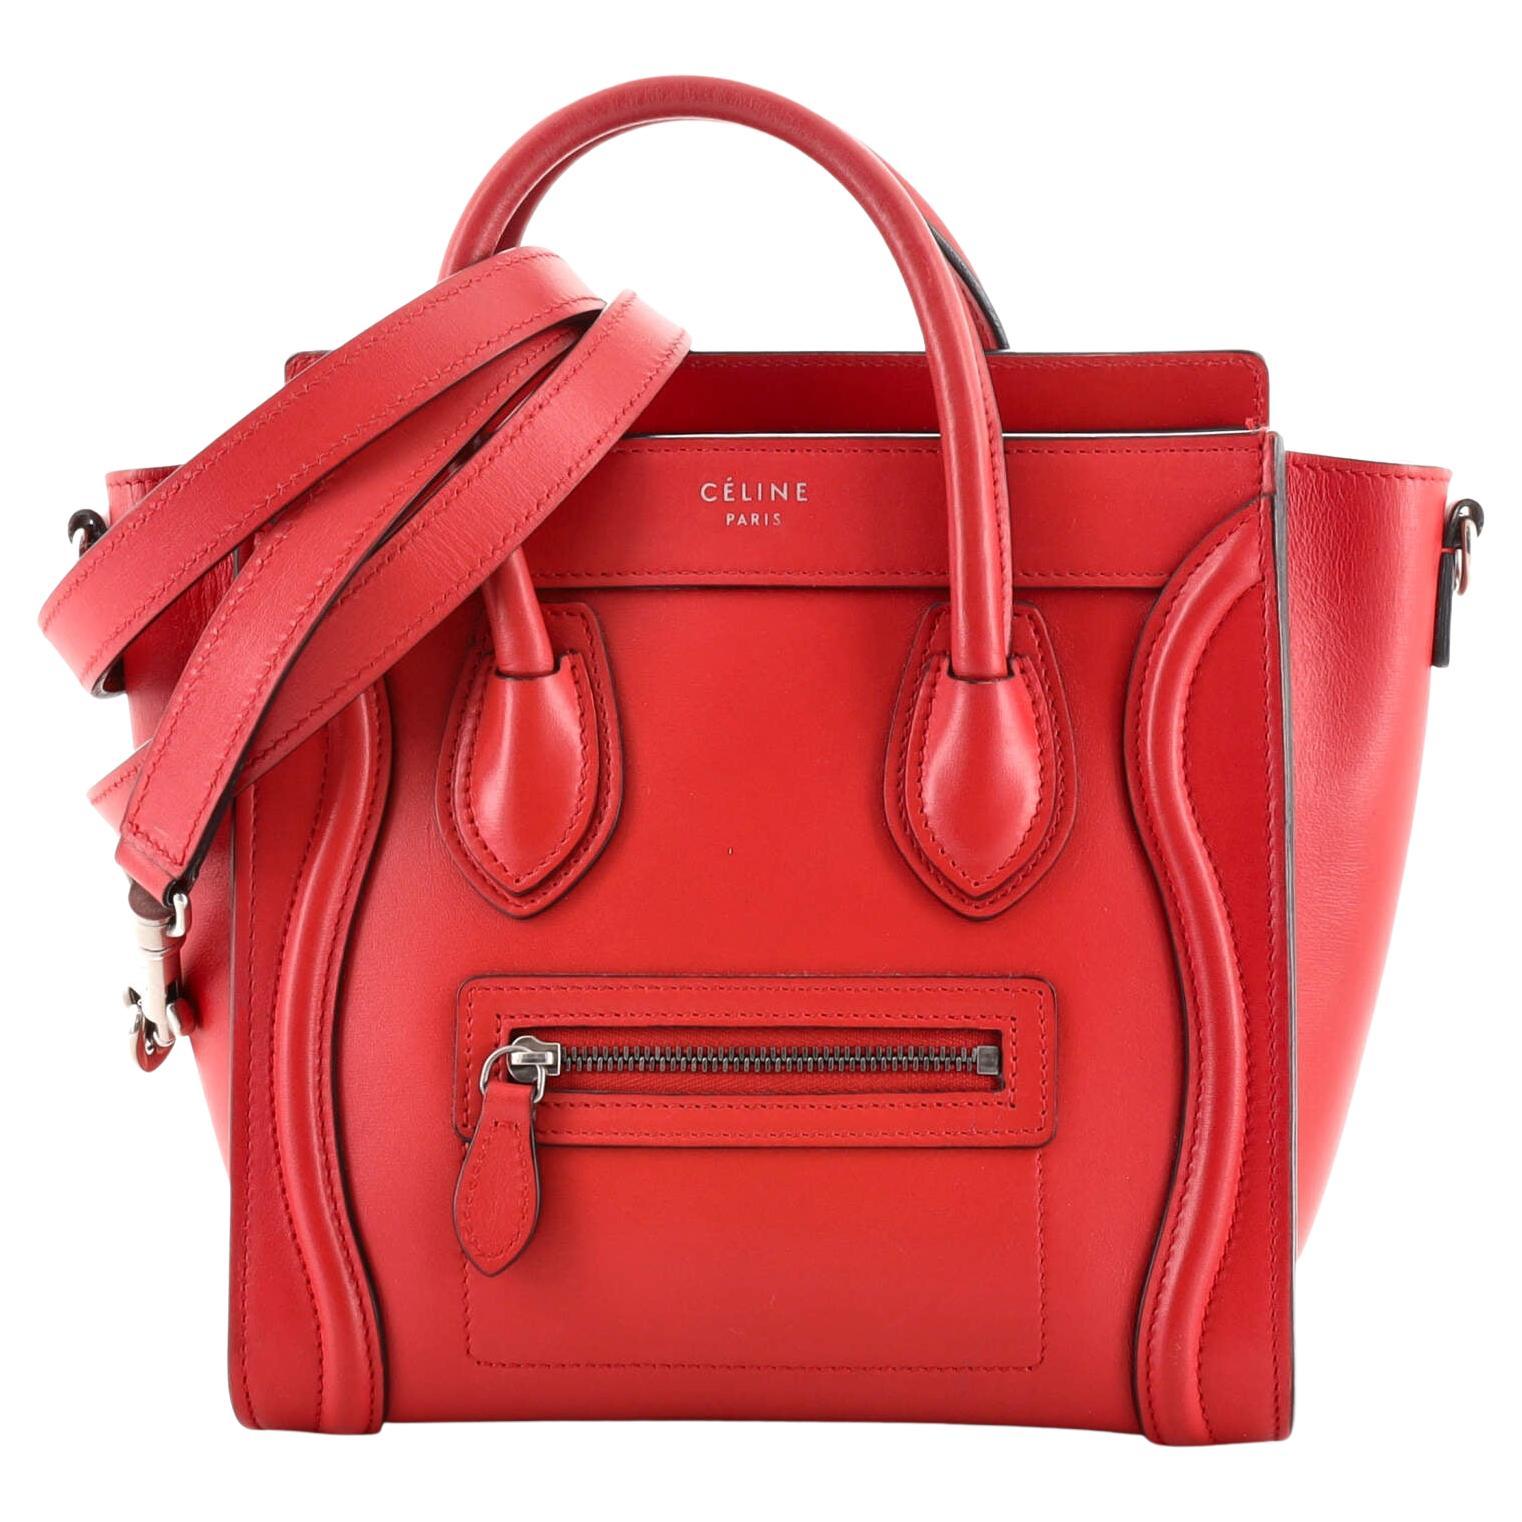 As New Celine of Paris Red Box Leather 'Star' Shoulder Bag with Gold ...